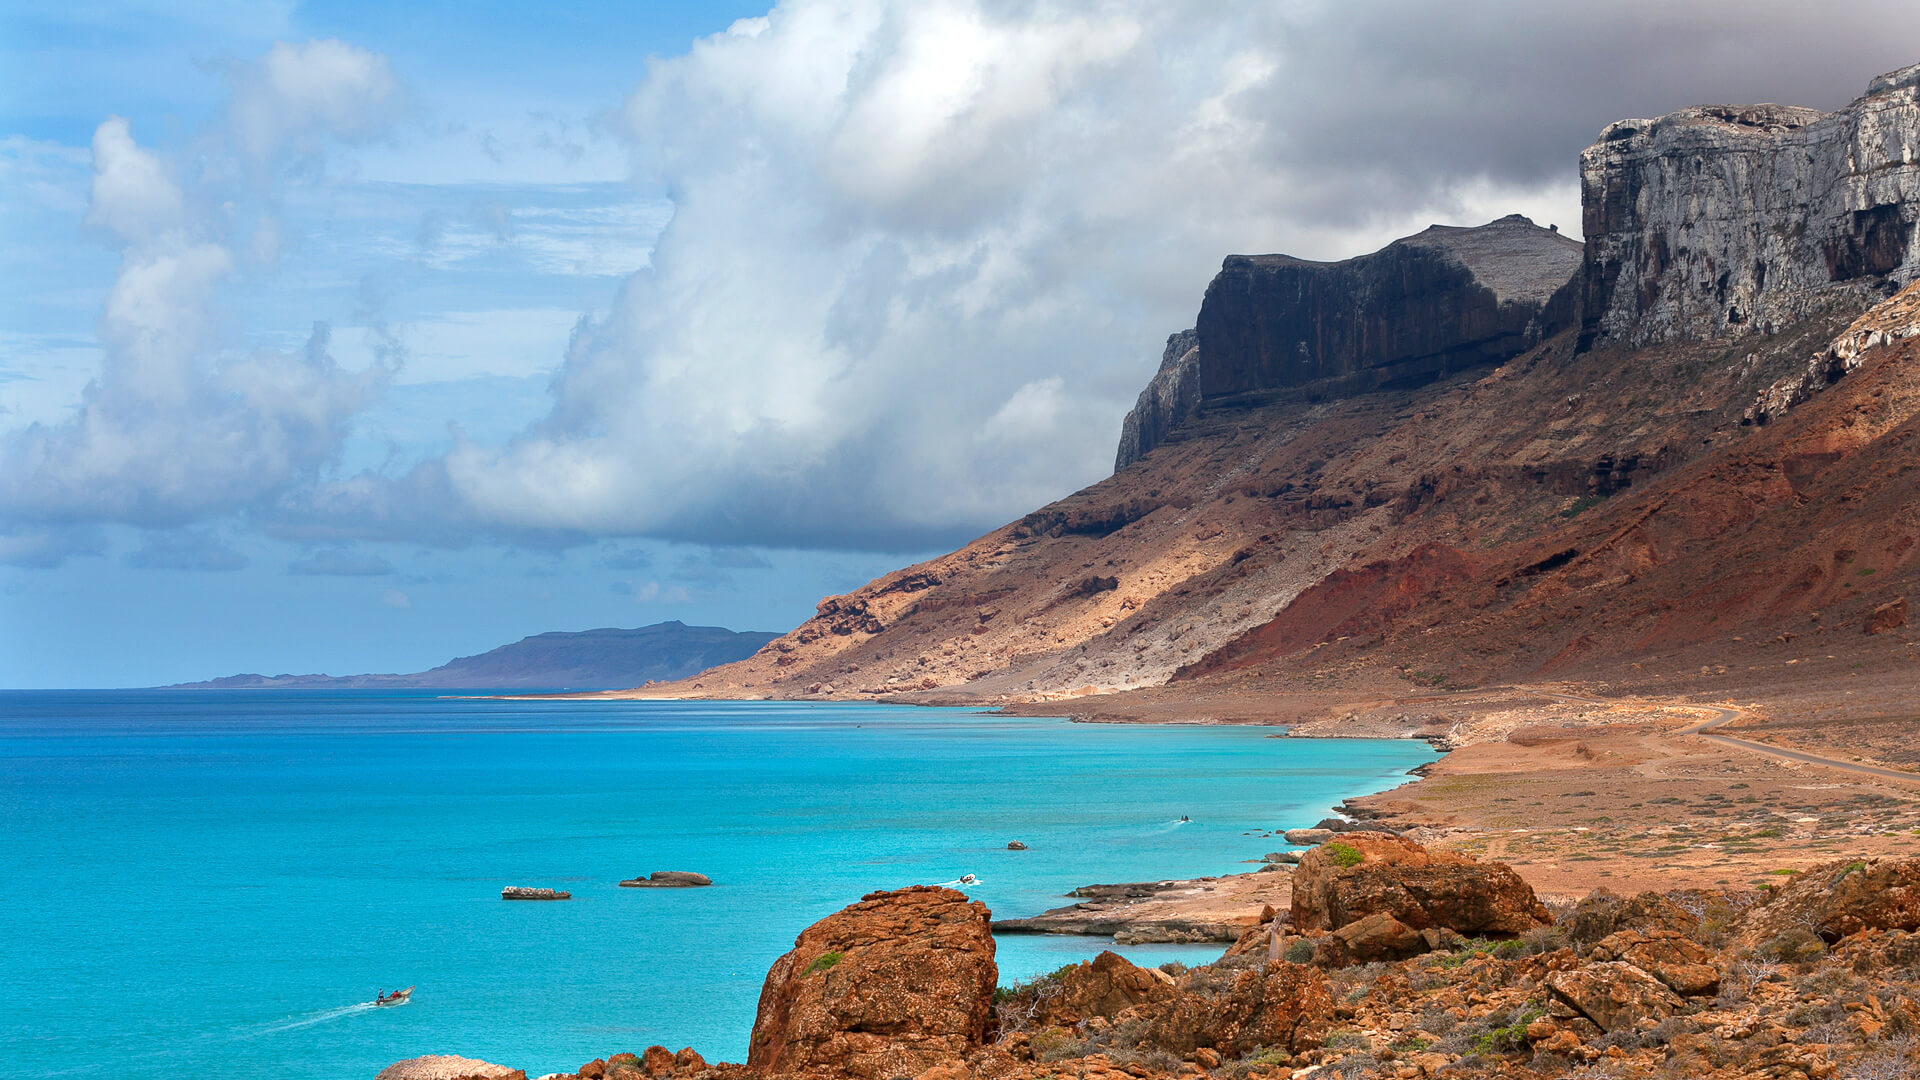 <p><strong>Estimated cost:</strong> $1,916 + cost of ferry to the island</p> <p>Home to approximately 800 species of fauna and flora, many of which are only found there, Socotra Island is regarded as a Galagapos Island of plant life. Located in the Indian Ocean approximately 200 miles from the mainland of Yemen, this remote area is also hailed as "where the weird things are" by National Geographic. Visitors will find plenty of unique plant life, such as the dragon's blood tree with an umbrella-like canopy and blood red resin.</p> <p>With an average temperature of 77 degrees Fahrenheit, the island features sandy beaches, limestone caves and majestic mountains, along with a variety of birds, one species of bat, a rare variety of skink and the legless lizard.</p> <p>Although the island is home to around 40,000 people, don't expect a resort-type atmosphere for this secluded destination, complete with beachfront hotels and restaurants. Instead, you'll find a place devoted to ecotourism, centered on honoring the population's way of life.</p> <p><strong>How to get there: </strong>First, hop a flight to Salalah, Oman. From Salalah, you'll take a chartered ferry to the island via a tour company such as Lupine Travel, which you will need to arrange far in advance as tours to the area book quickly.</p>  <p><strong><em>More From GOBankingRates</em></strong></p>   <ul> <li><a href="https://www.gobankingrates.com/investing/real-estate/houses-in-cities-suddenly-major-bargains/?utm_term=incontent_link_3&utm_campaign=1224529&utm_source=msn.com&utm_content=13&utm_medium=rss"><strong><em>Houses in These Cities Are Suddenly Bargains</em></strong></a></li> <li><a href="https://www.gobankingrates.com/travel-rich/?utm_term=incontent_link_4&utm_campaign=1224529&utm_source=msn.com&utm_content=14&utm_medium=rss"><strong><em>Get Top Travel Tips To Help You Save More</em></strong></a></li> <li><a href="https://www.gobankingrates.com/top-alternative-investments-1270486/?utm_source=msn.com&utm_term=incontent_link_5&utm_campaign=1224529&utm_content=15&utm_medium=rss" rel="noreferrer noopener sponsored"><strong><em>3 Things You Must Do When Your Savings Reach $50,000</em></strong></a></li> <li><a href="https://www.gobankingrates.com/small-business-spotlight-nomination-form/?utm_term=incontent_link_6&utm_campaign=1224529&utm_source=msn.com&utm_content=16&utm_medium=rss" rel="noreferrer noopener"><strong><em>Have a Favorite Small Business? Let Us Know About It</em></strong></a></li> </ul>    <p><em><a href="https://www.gobankingrates.com/author/jodioconnell/?utm_term=incontent_link_7&utm_campaign=1224529&utm_source=msn.com&utm_content=17&utm_medium=rss" rel="">Jodi Thornton-O'Connell</a> contributed to the reporting for this article.</em></p> <p><em><em><small>Travel costs were determined using Google Flights from Los Angeles International Airport (LAX) for a trip for one person running from June 5-11 of 2023, except for destinations with limited travel access (St. Matthew's Island, Ellesmere Island, Ittoqqortoormiit). Bus and train fares were determined through Wanderu. Car rental rates are for an economy-sized car using the Kayak website.</small></em></em></p>